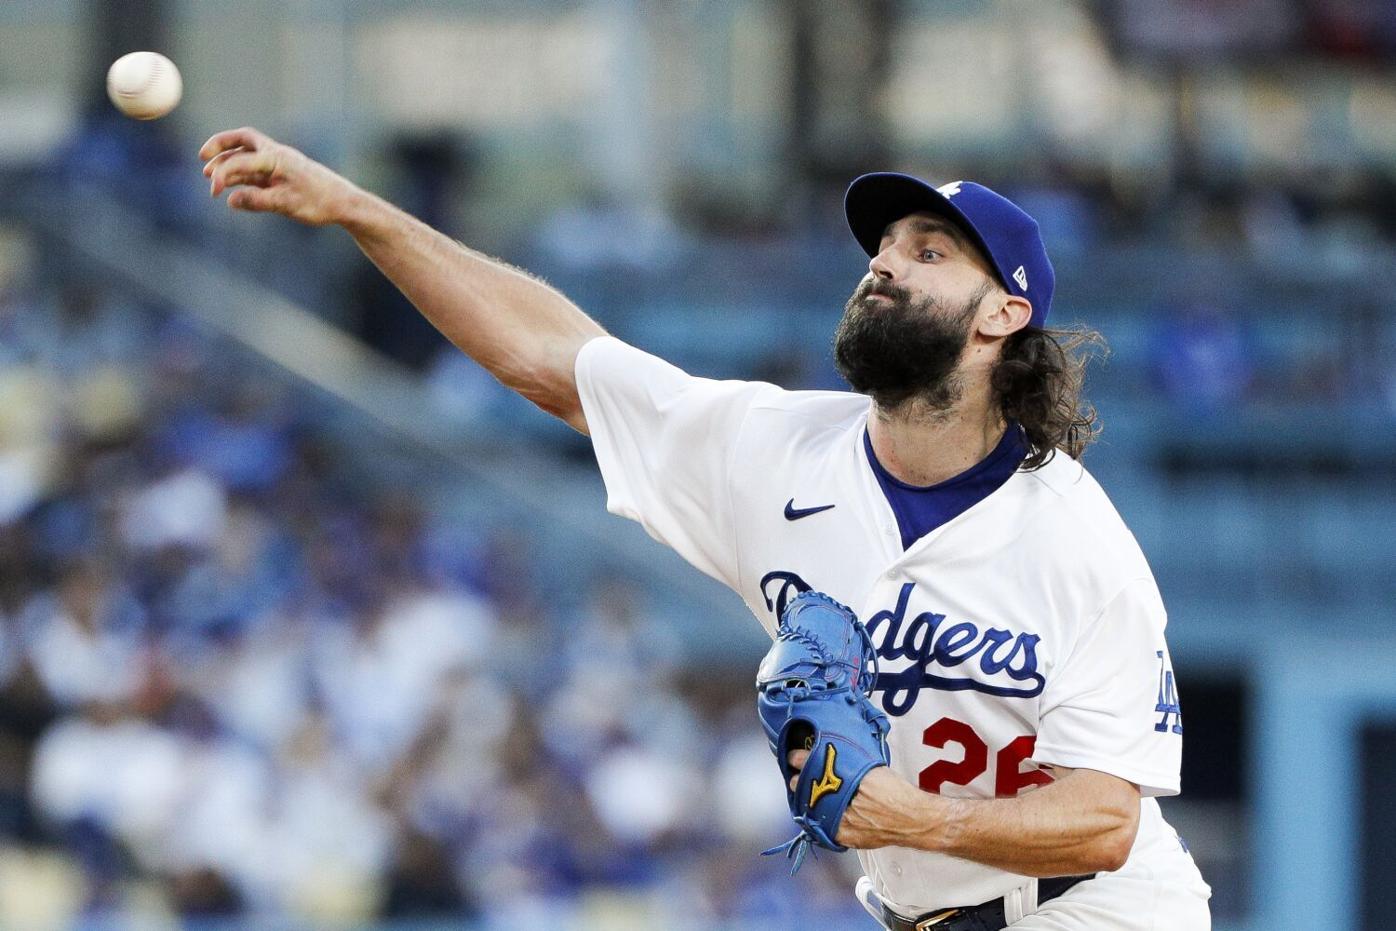 Dodgers All-Star pitcher Tony Gonsolin out with forearm strain